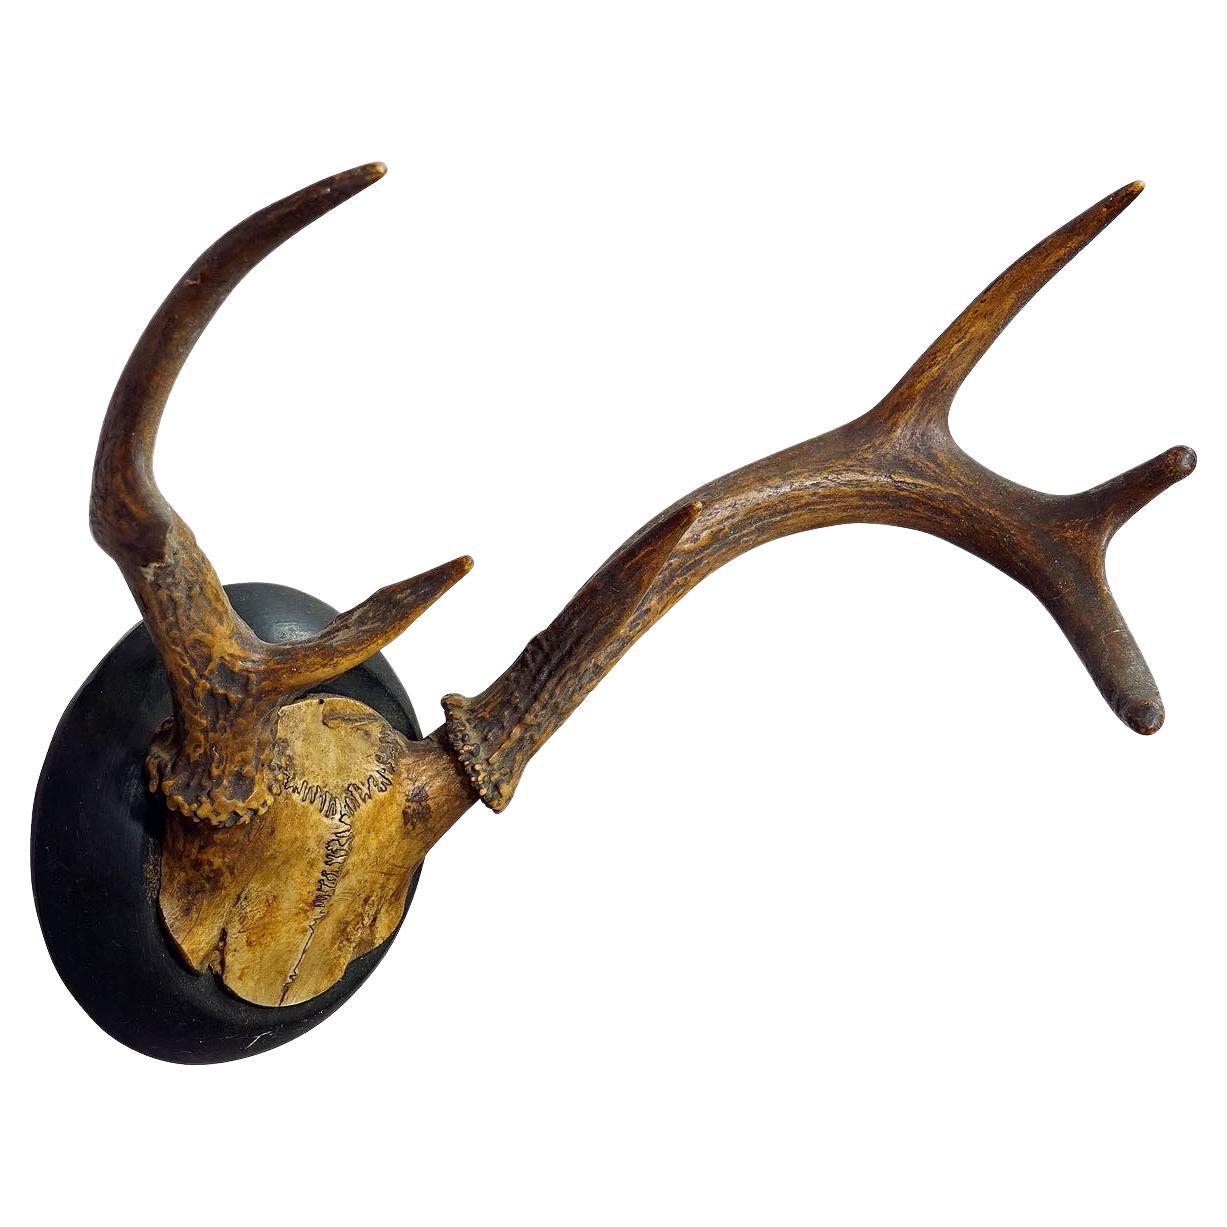 Abnorm White Tailed Deer Trophy Mount on Wooden Plaque ca. 1900s